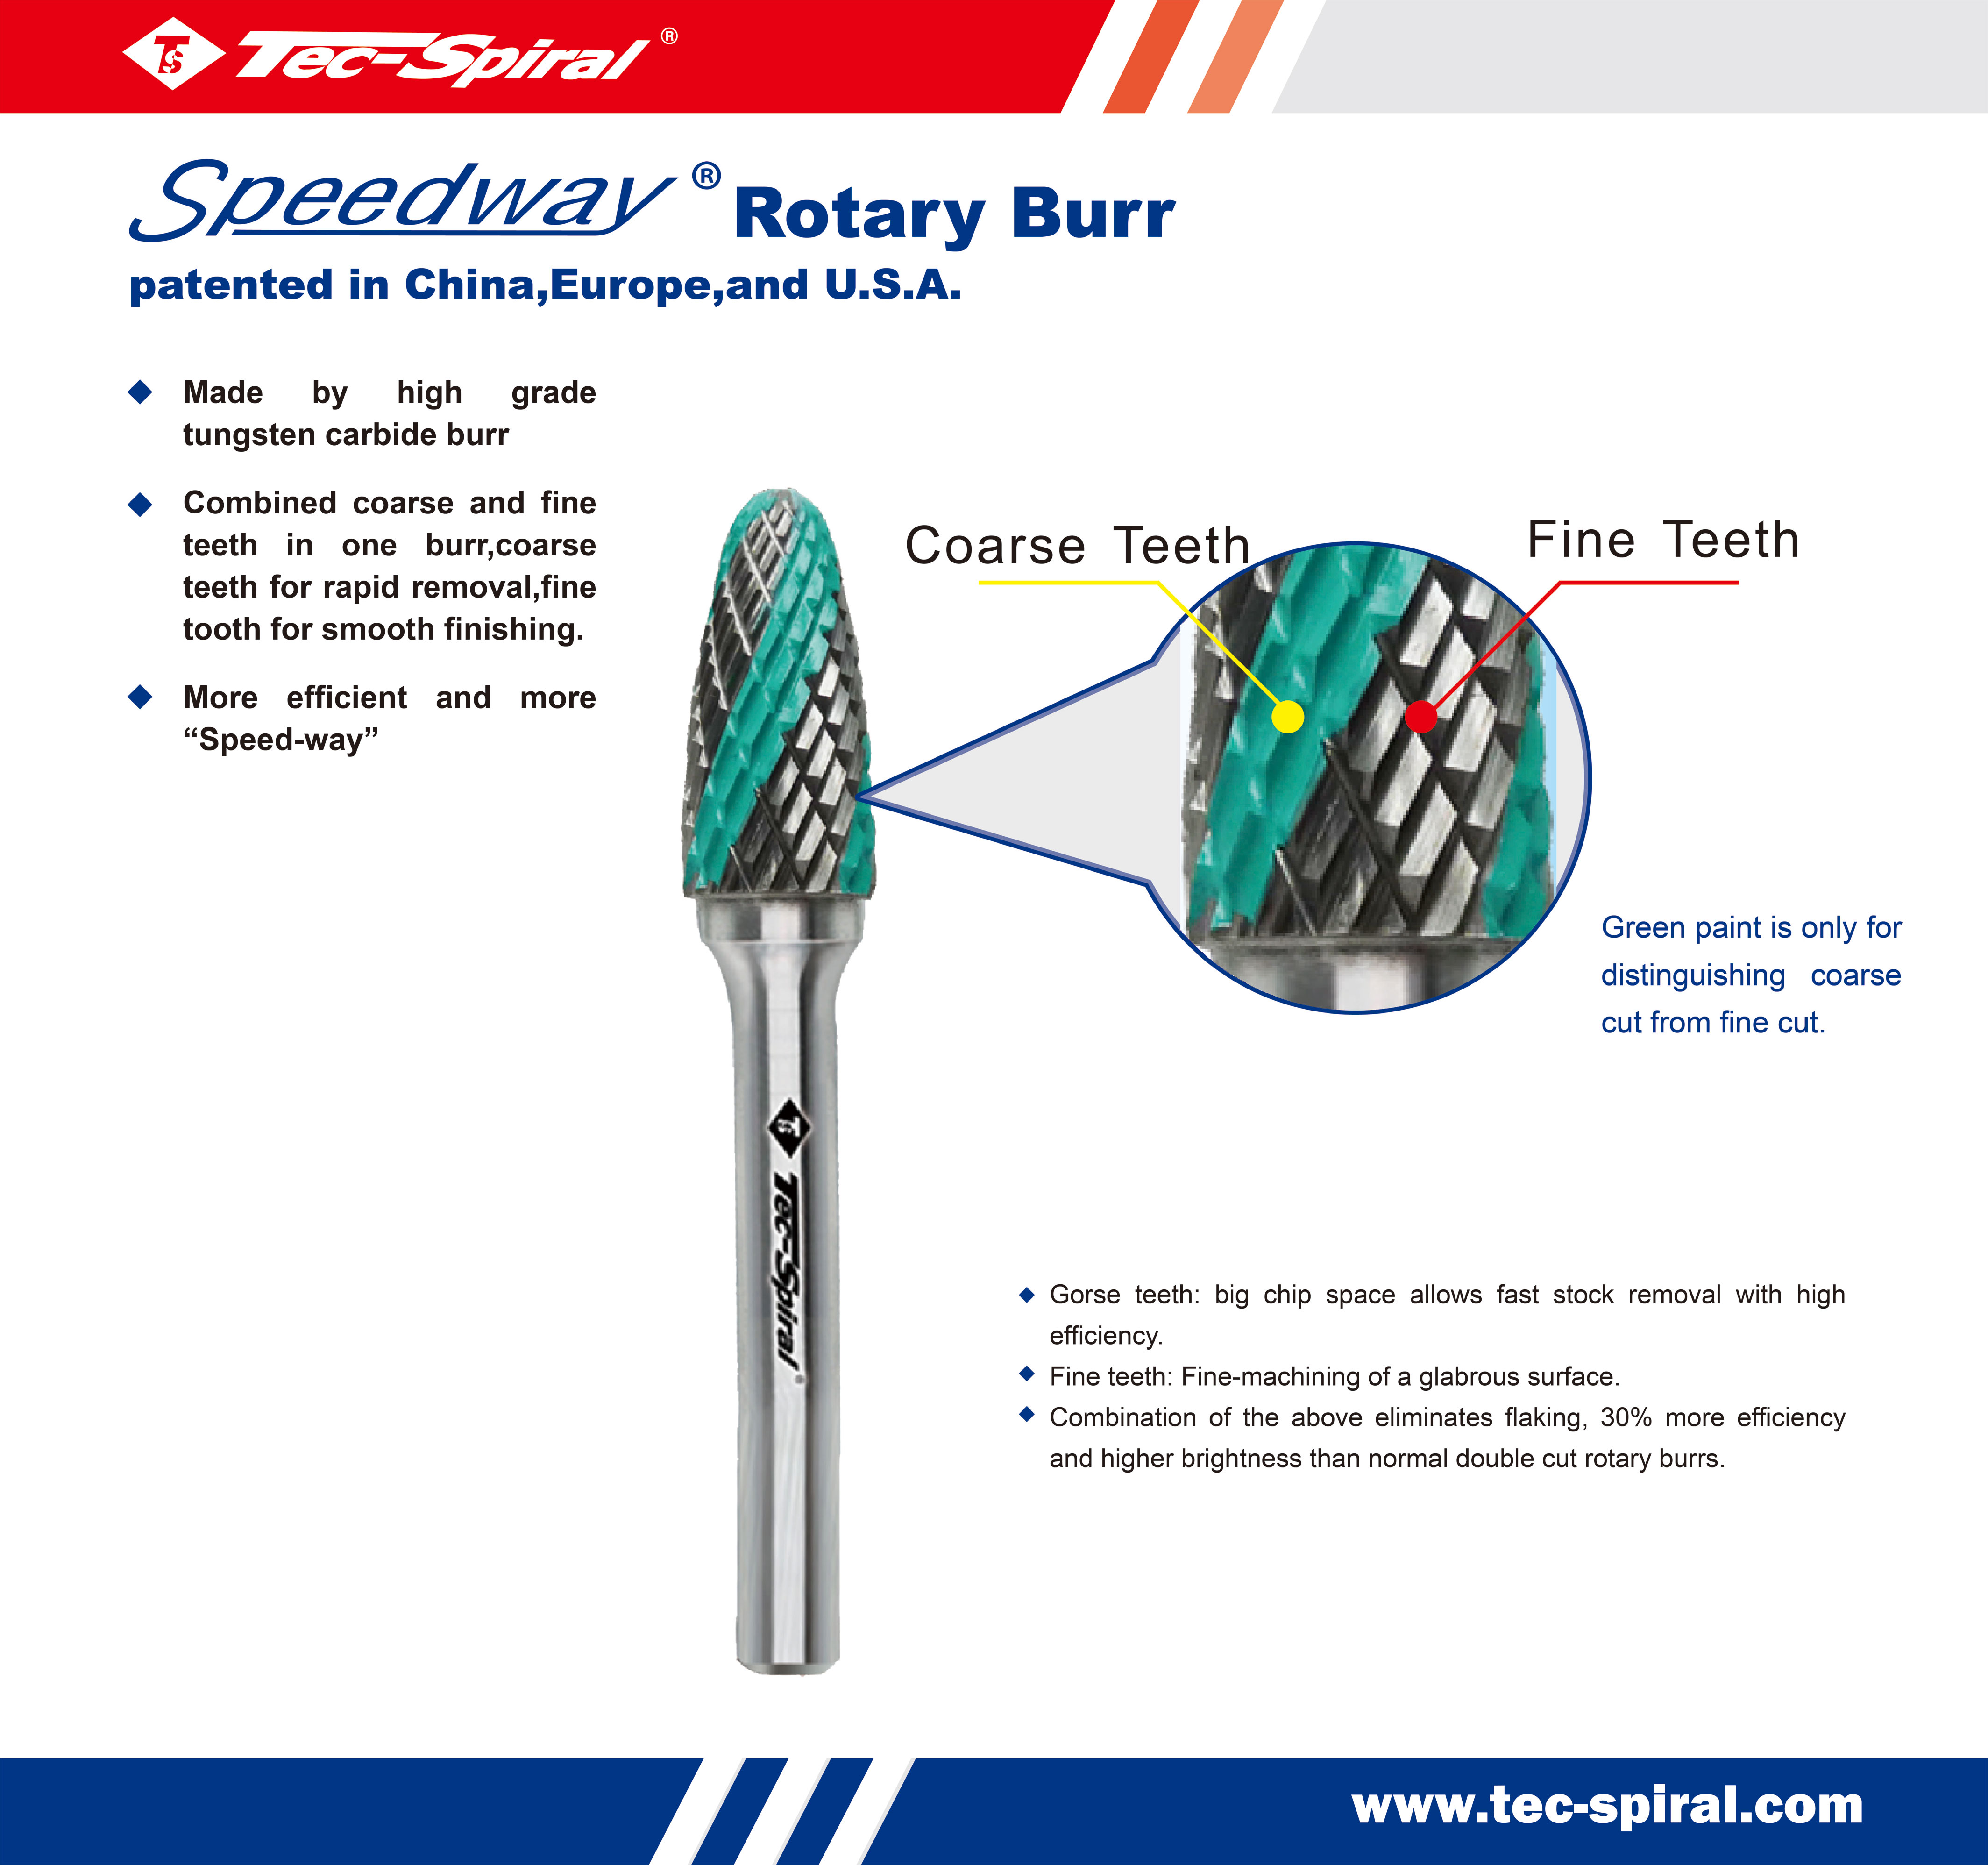 Leaflet: Patent Speedway Rotary Burr